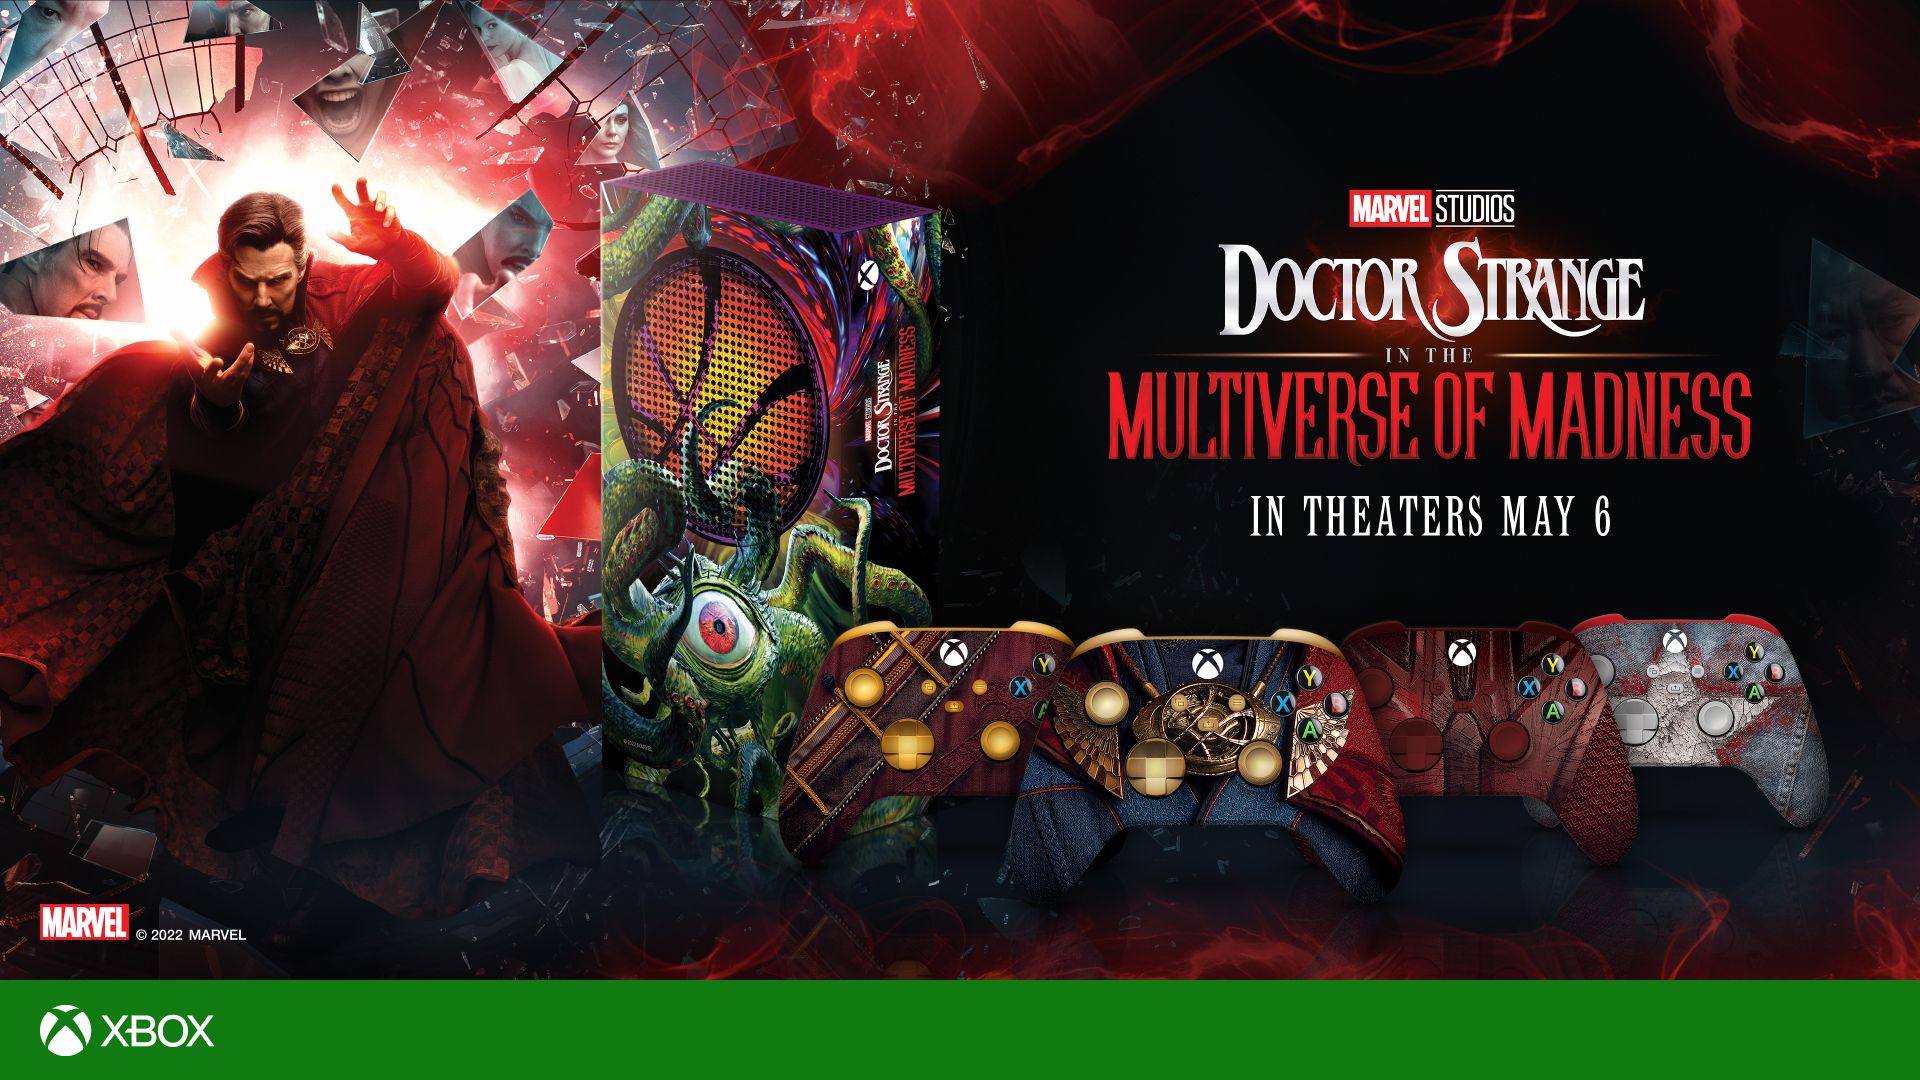 "Doctor Strange in the Multiverse of Madness" Custom Xbox Console and Controllers Hero Image